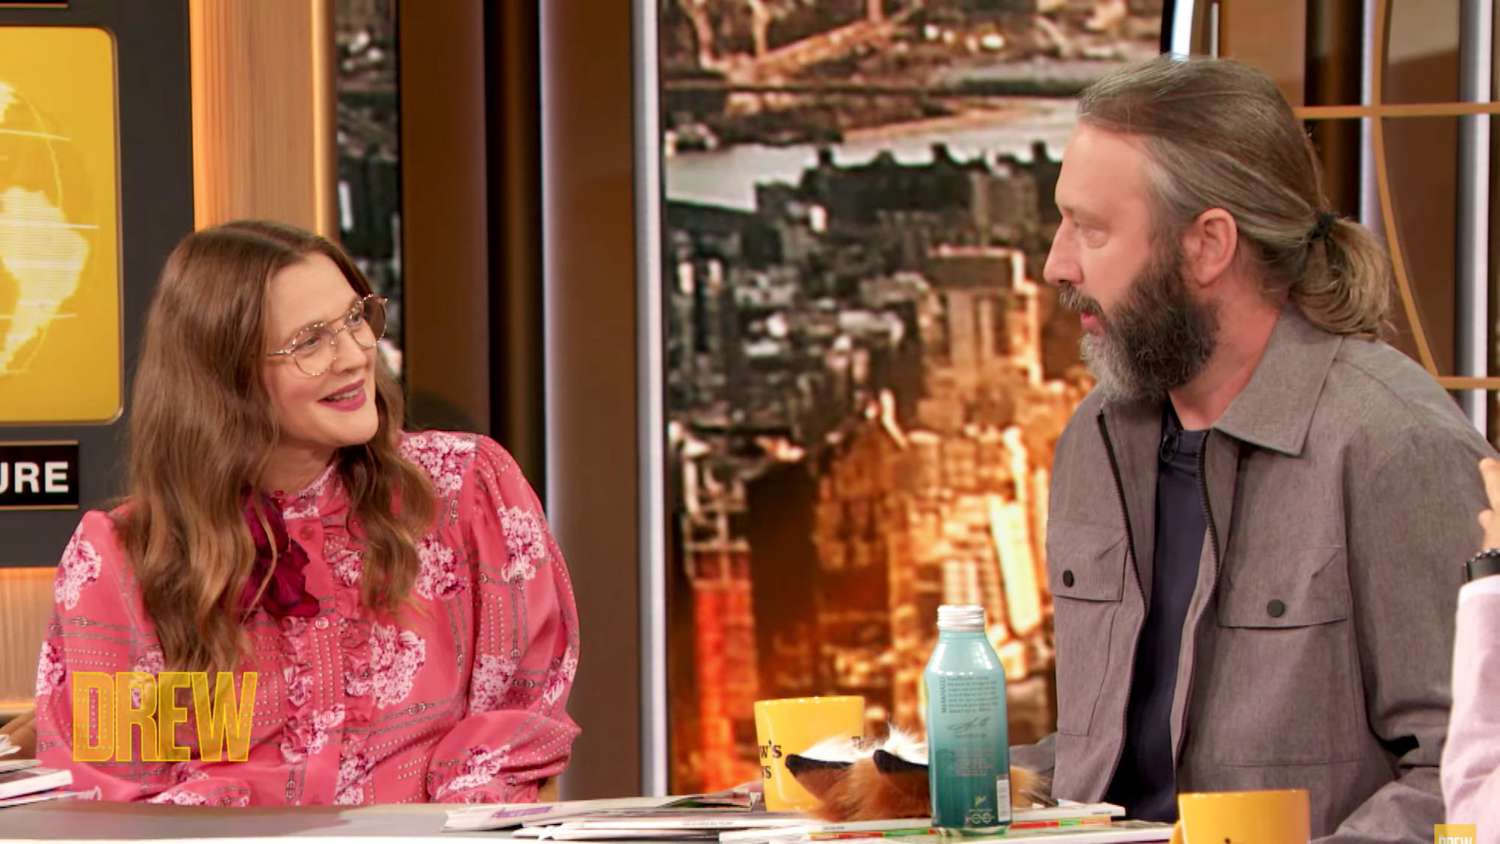 Drew Barrymore and Ex-Husband Tom Green Still 'Love' Each Other After Reuniting on Her Show